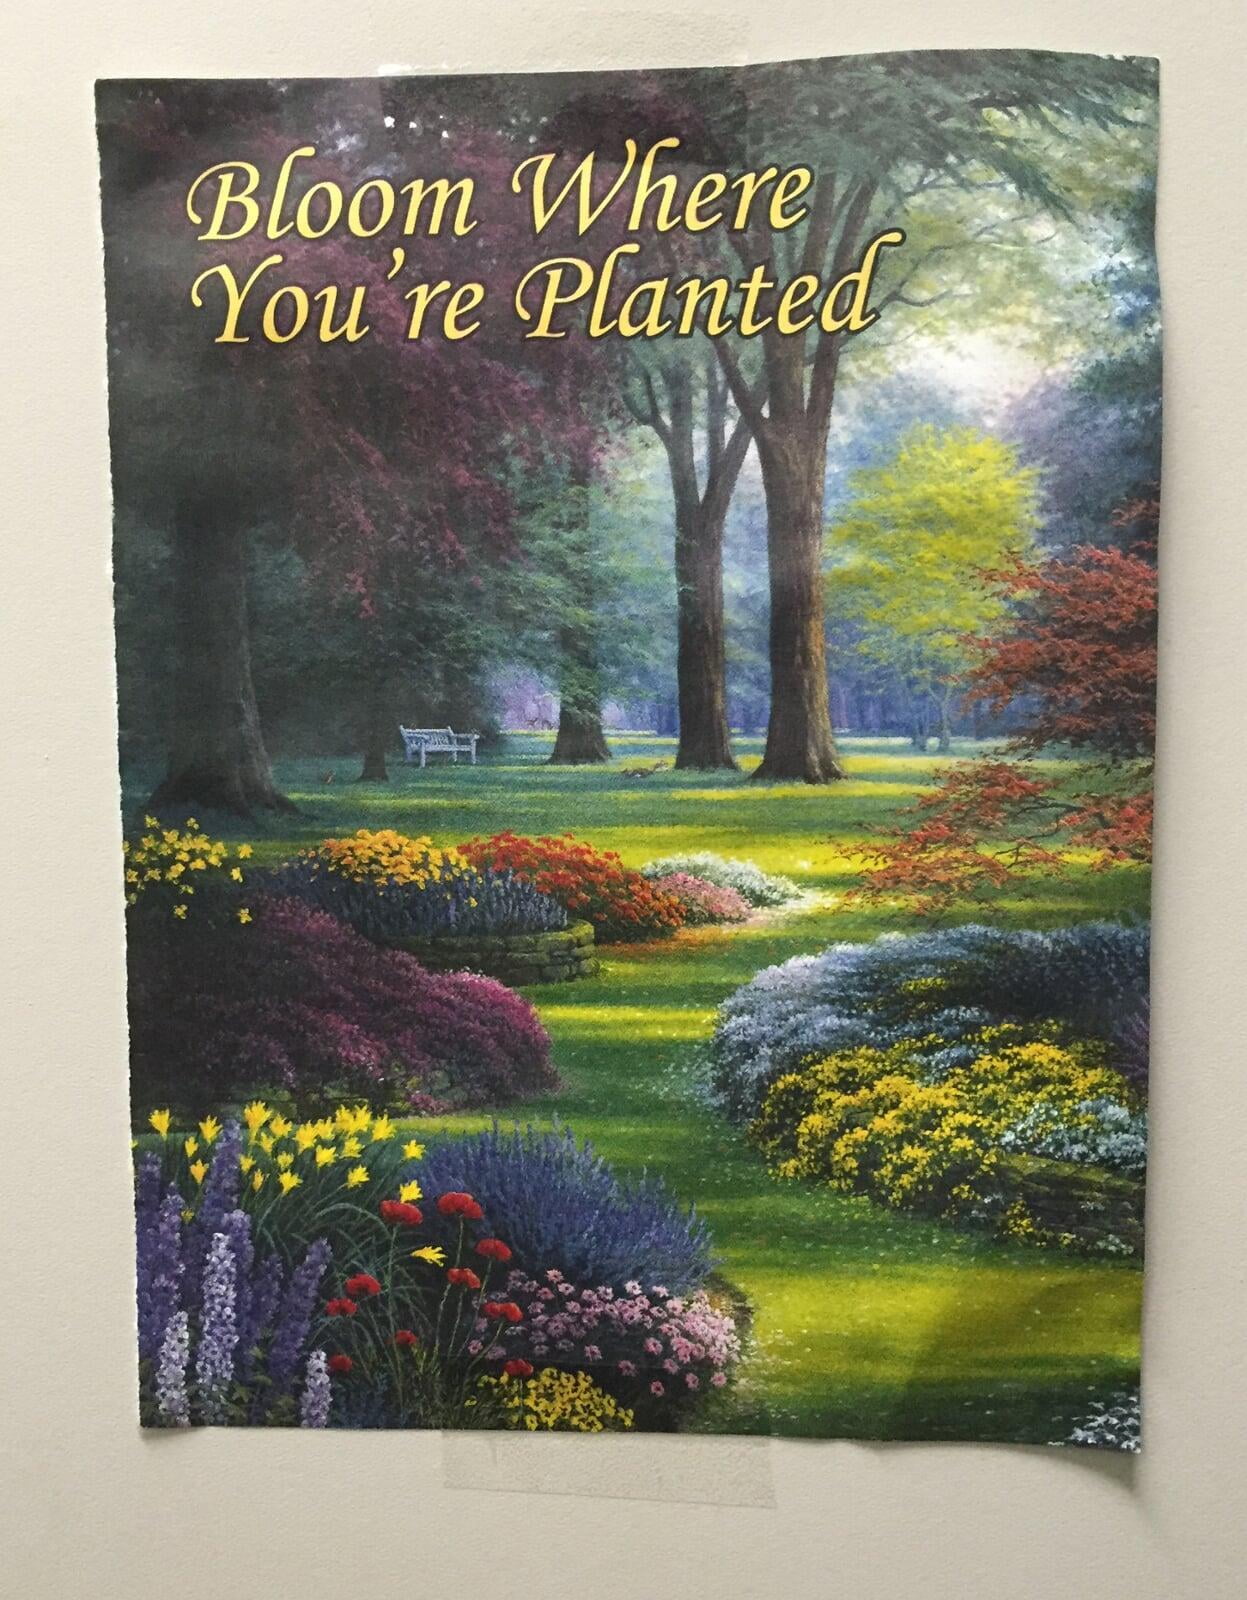 Learn how to stay encouraged and bloom where you're planted on www.MusicOnACart.com